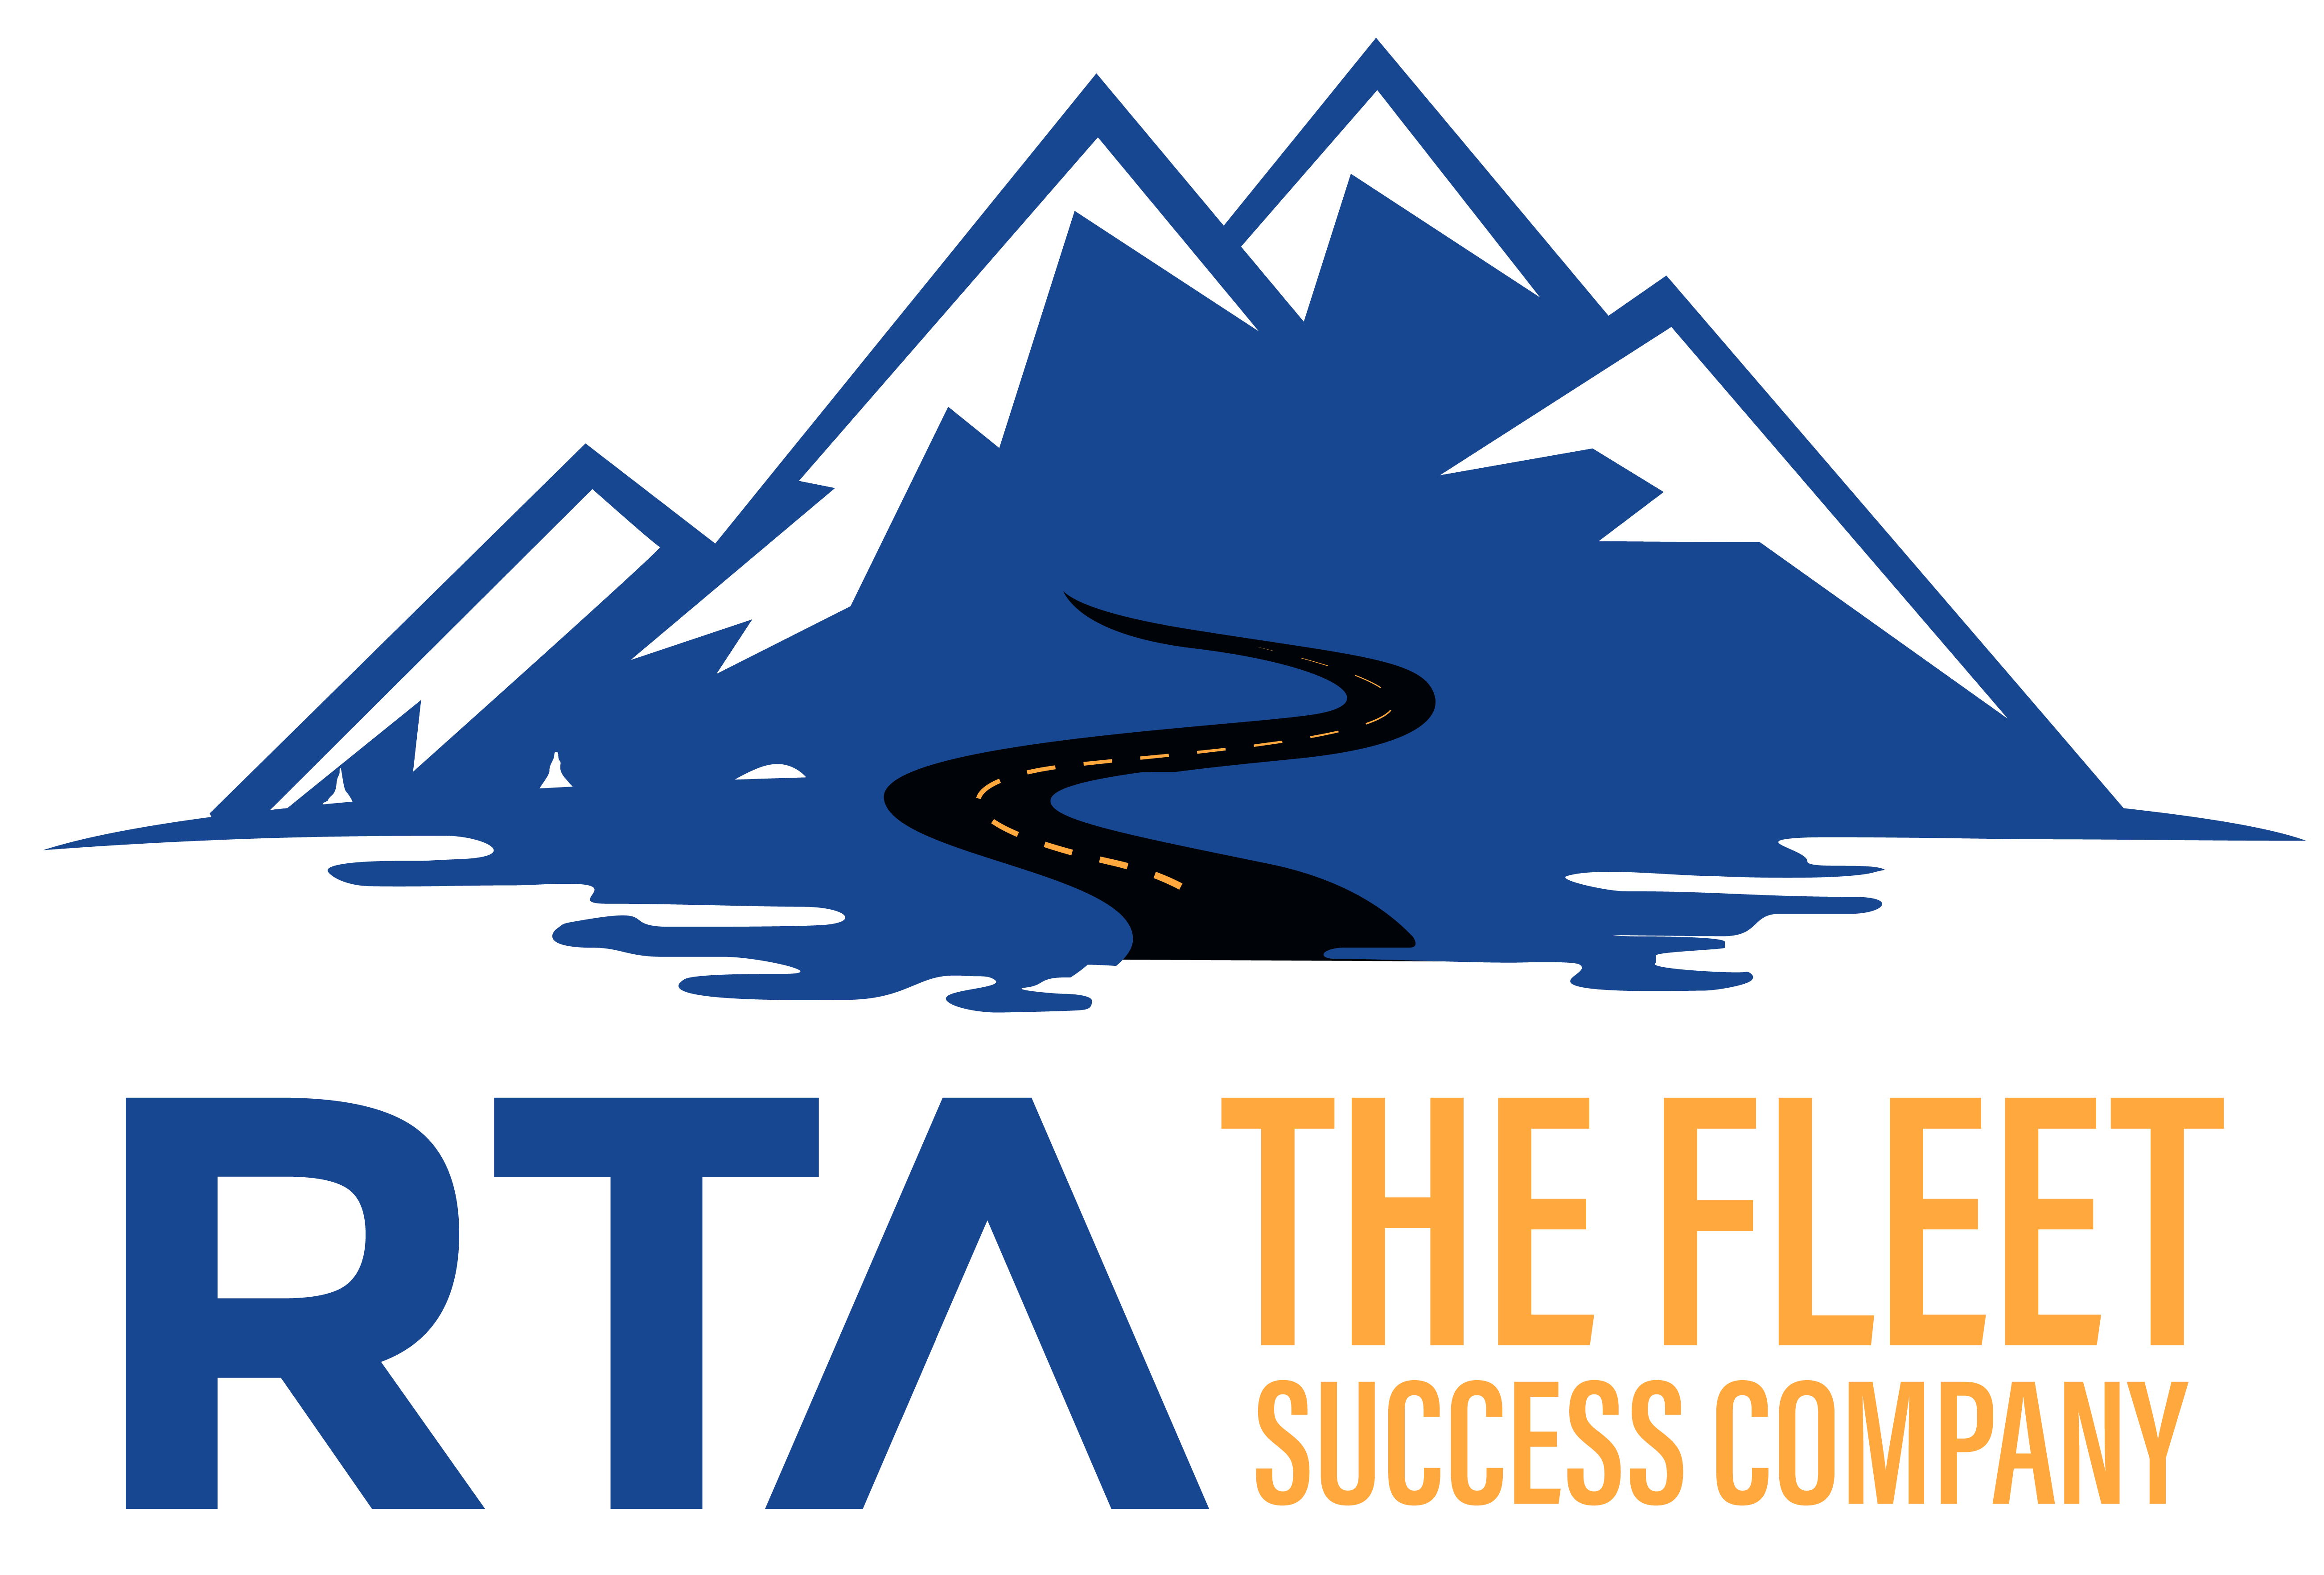 A four peaked mountain range with a winding road above the words "RTA the Fleet Success Company" 